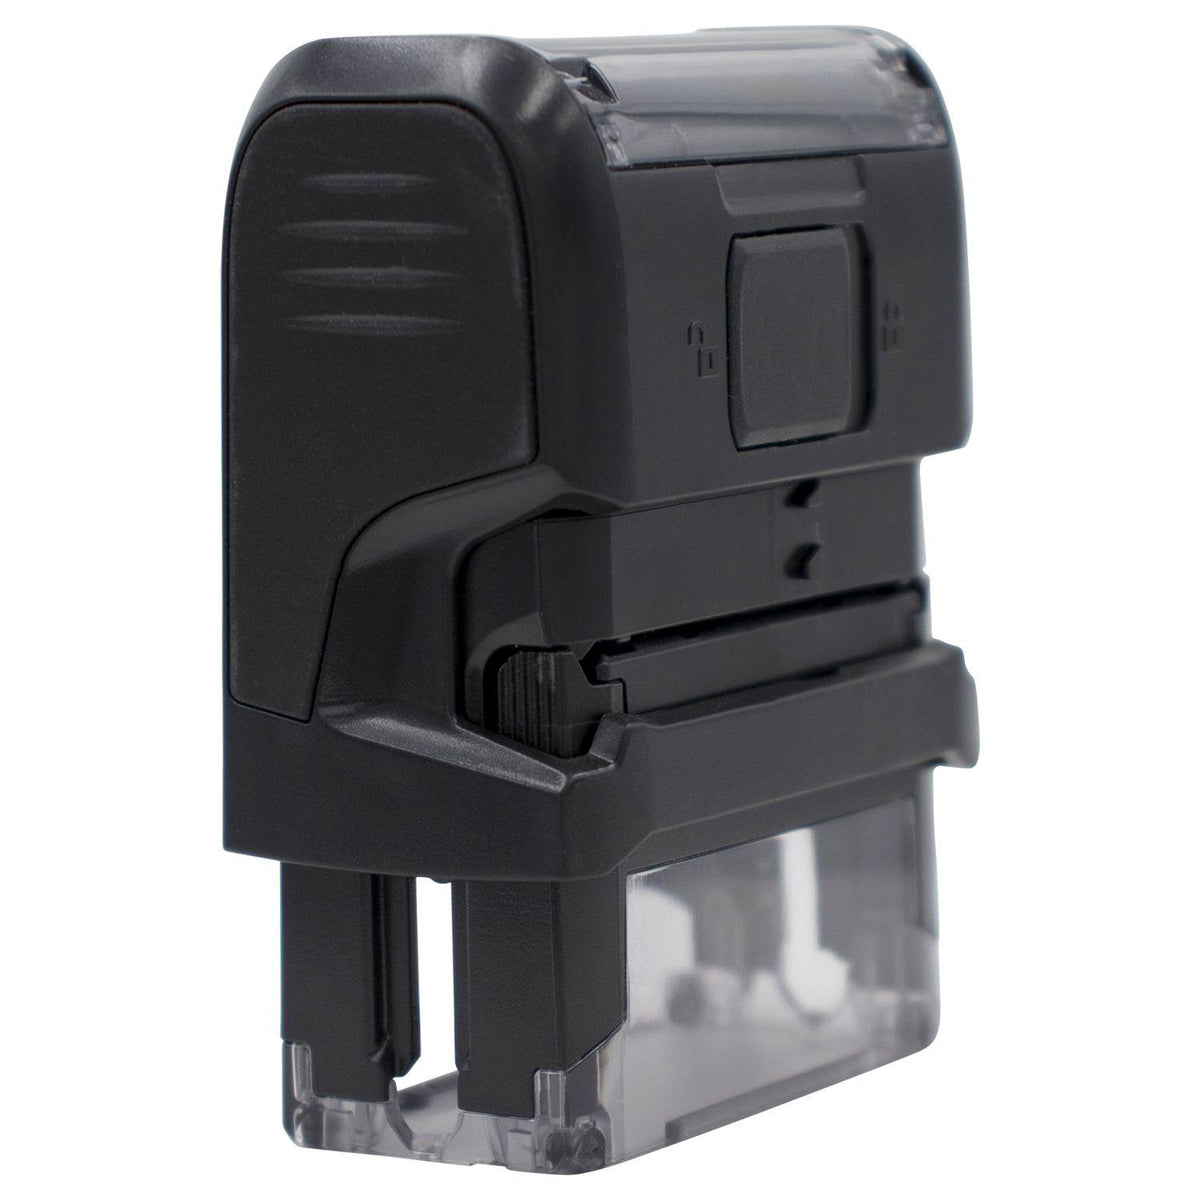 Self-Inking Devolver Copia Stamp - Engineer Seal Stamps - Brand_Trodat, Impression Size_Small, Stamp Type_Self-Inking Stamp, Type of Use_General, Type of Use_Office